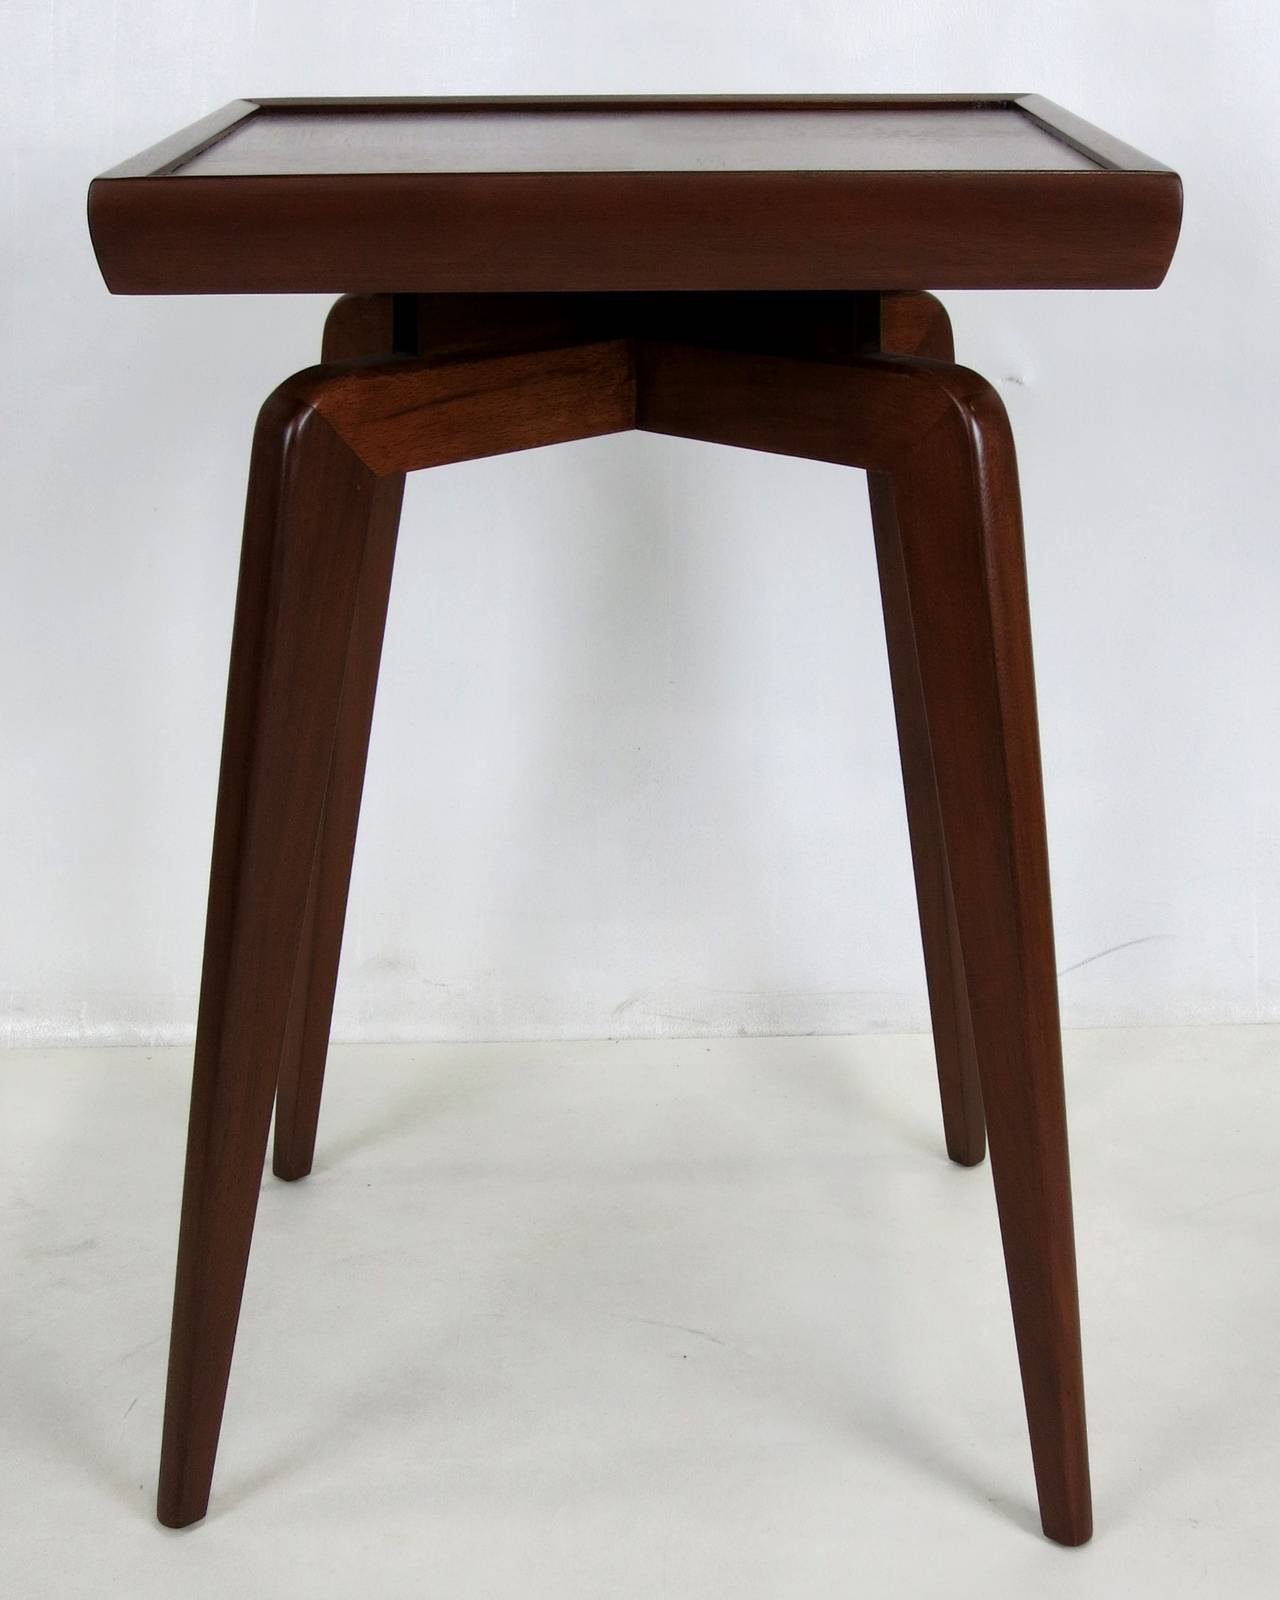 Dramatic pair of Spider Leg Side Tables with Quartered Parquet top in the style of Gio Ponti.  The pair have been freshly refinished in Medium Walnut Lacquer.  Top quality materials and workmanship.  